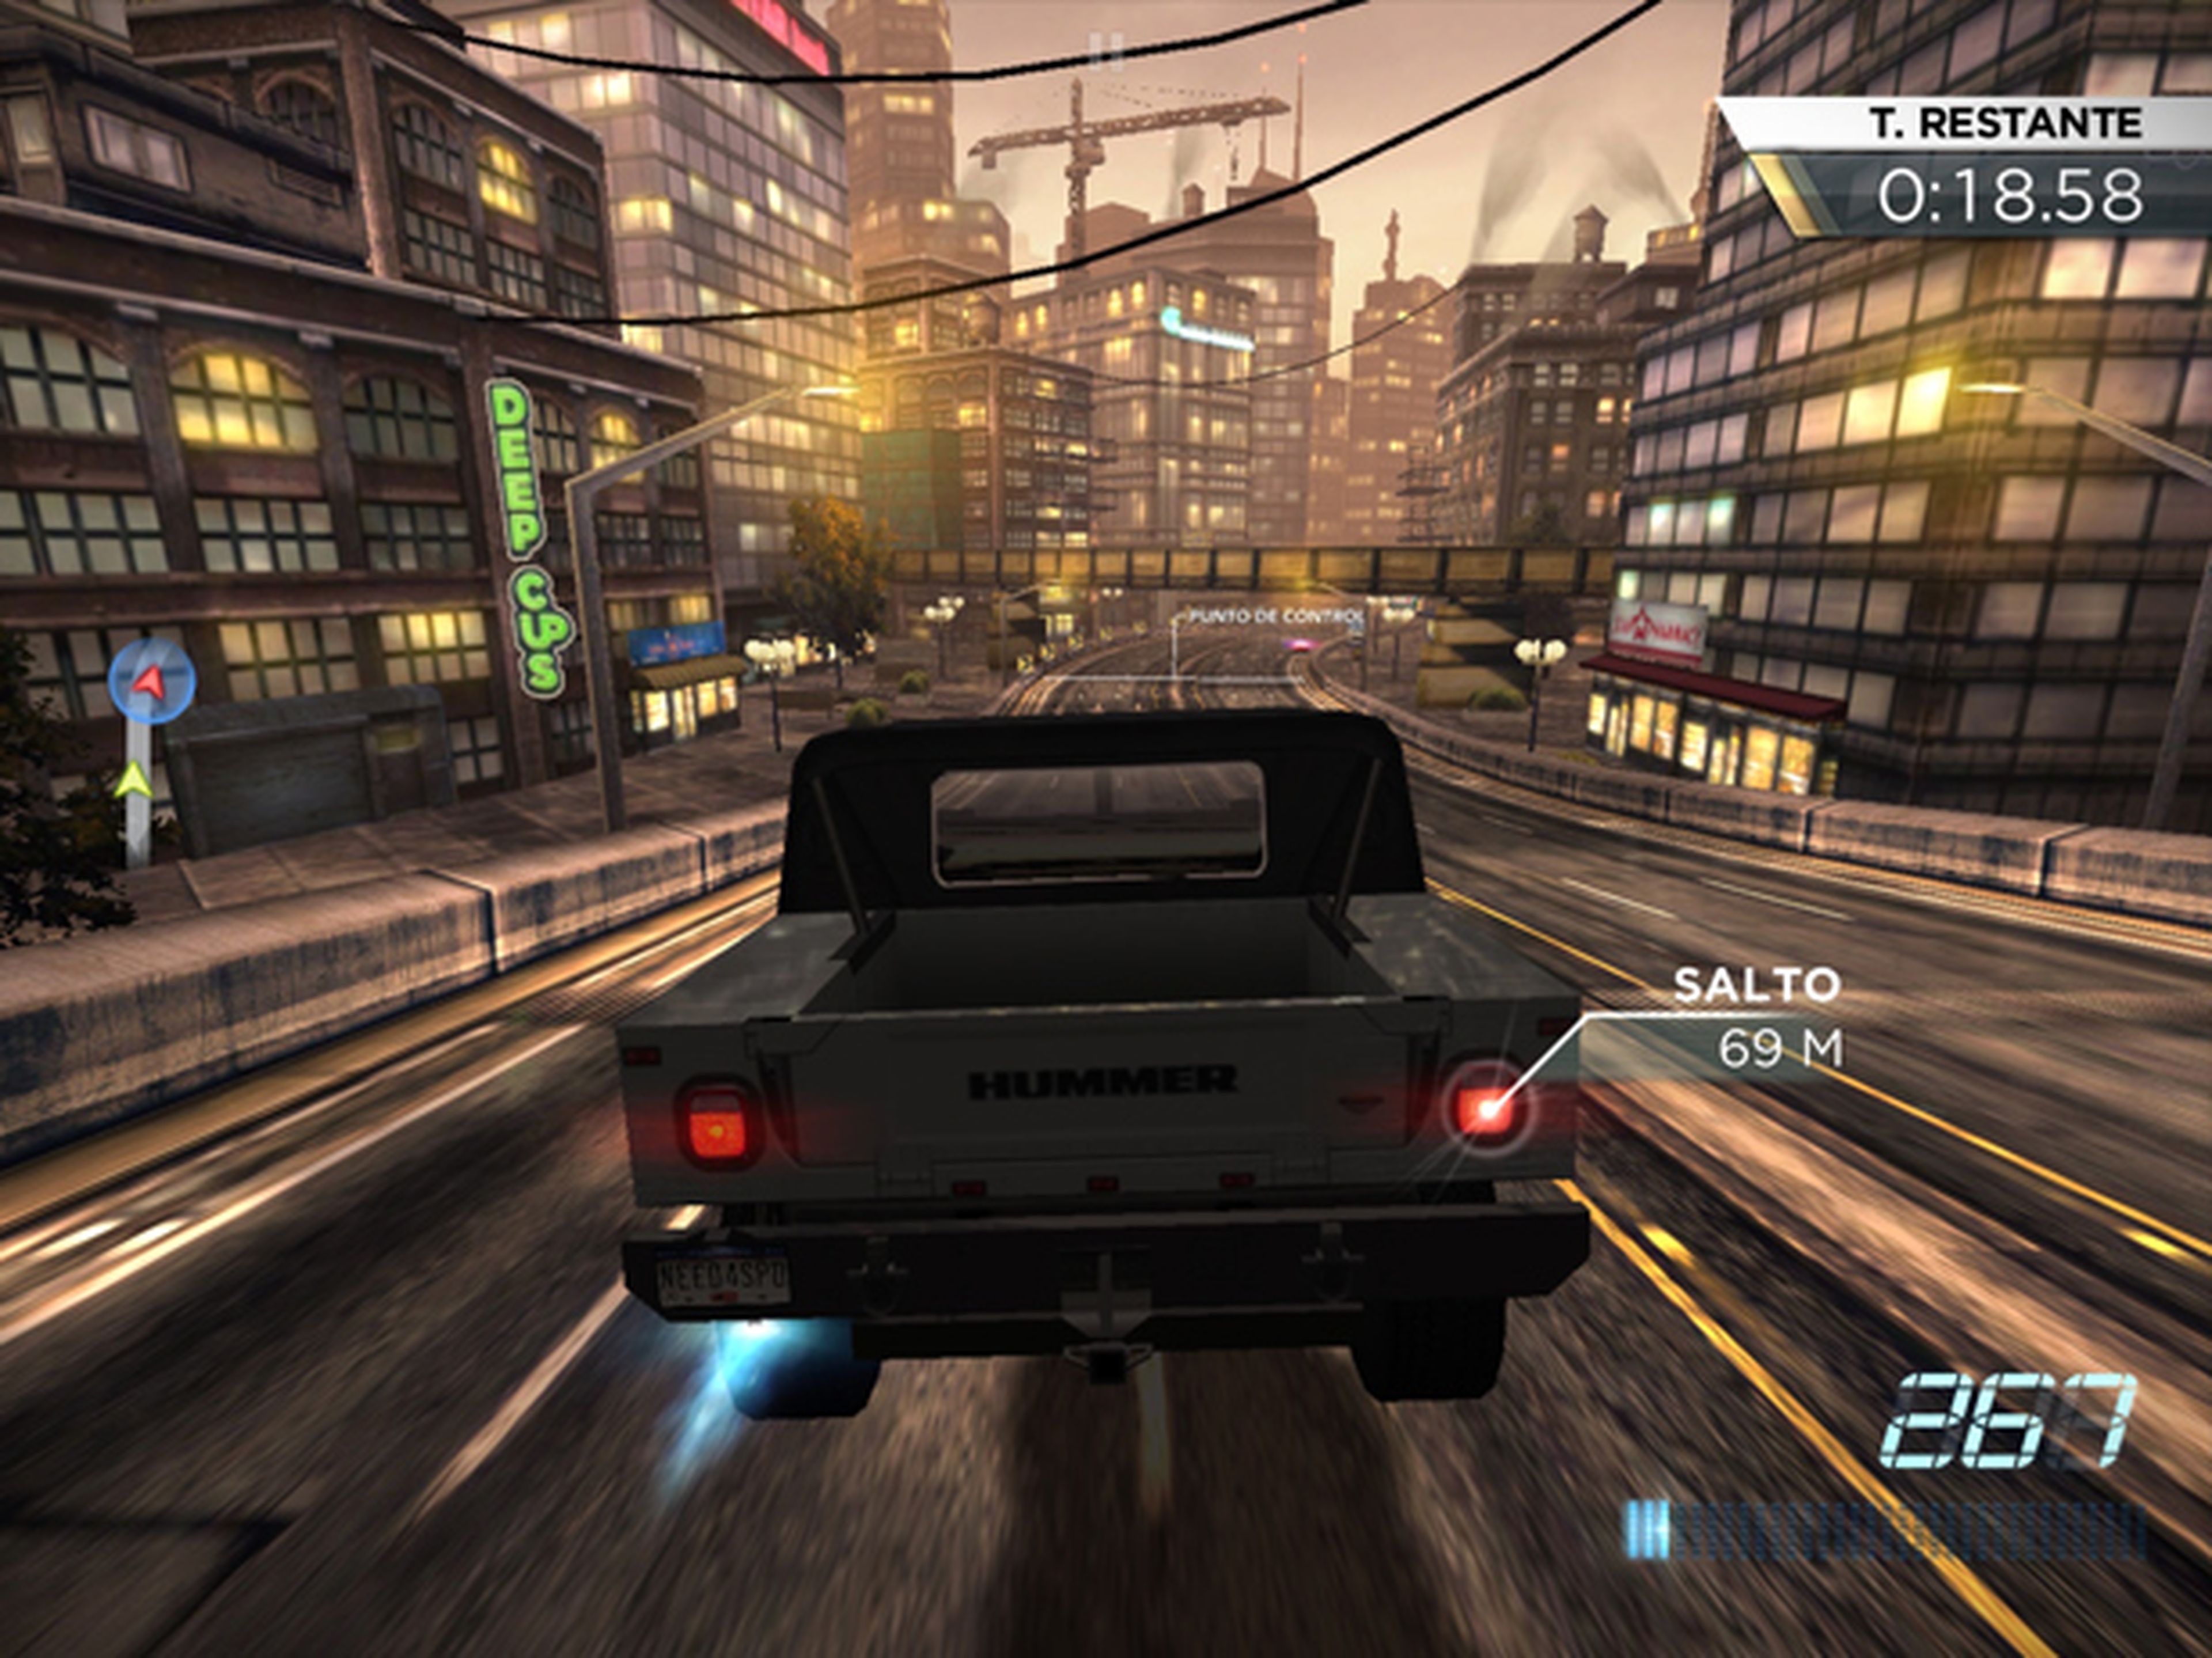 Need for Speed Most Wanted en iOS y Android